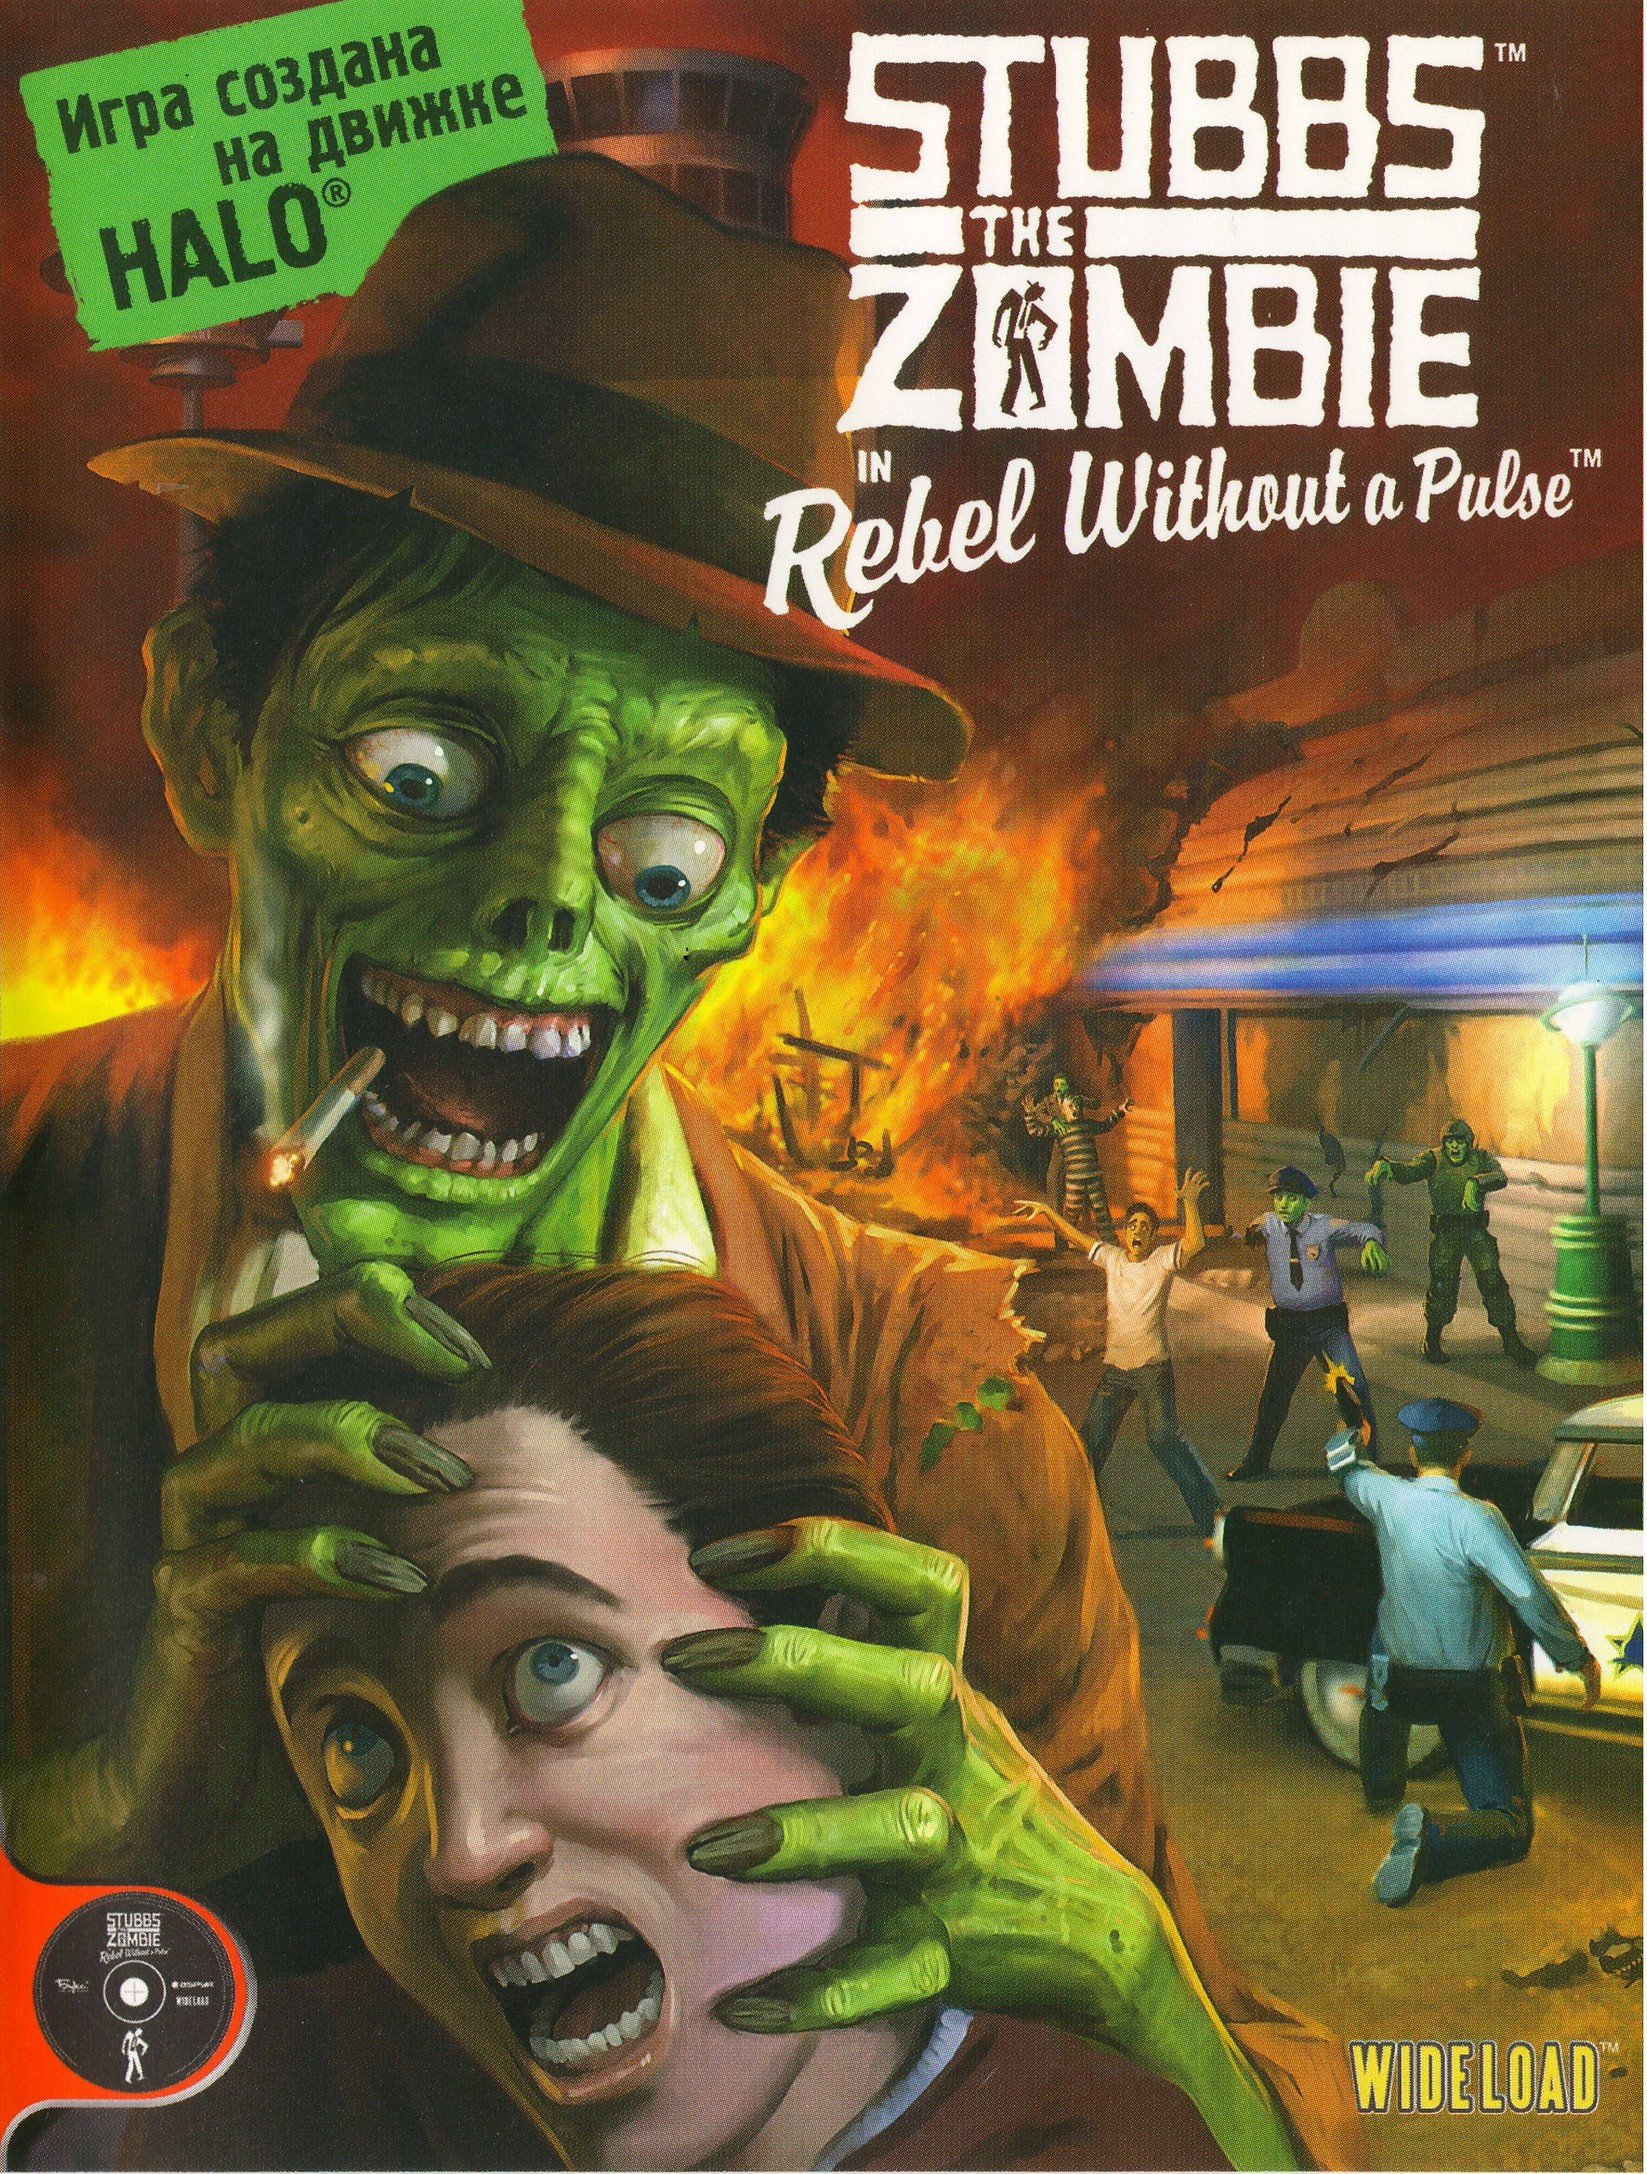 Stubbs the Zombie in Rebel Without a Pulse v.1.02 [Бука] (2005) PC | Лицензия